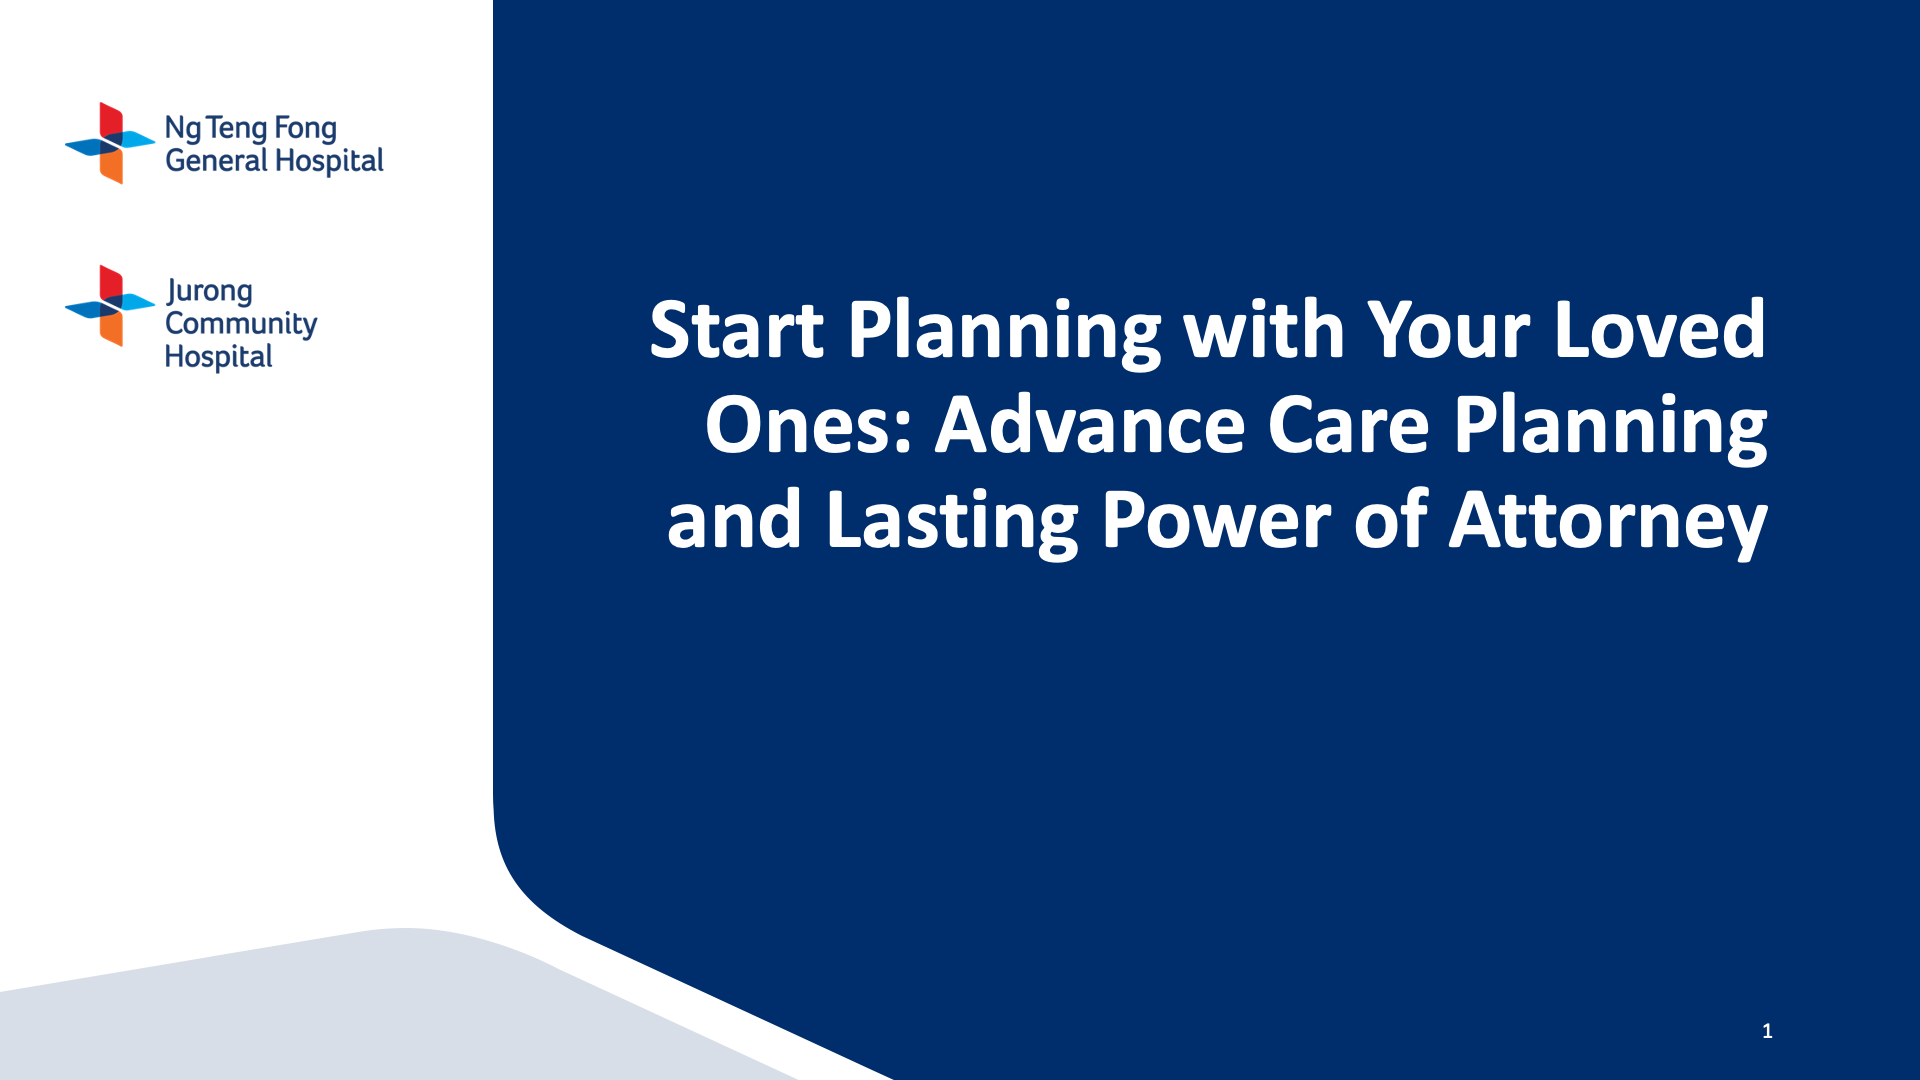 Monthly Caregiver Talk - Start Planning with Your Loved Ones: Advance Care Planning and Lasting Power of Attorney